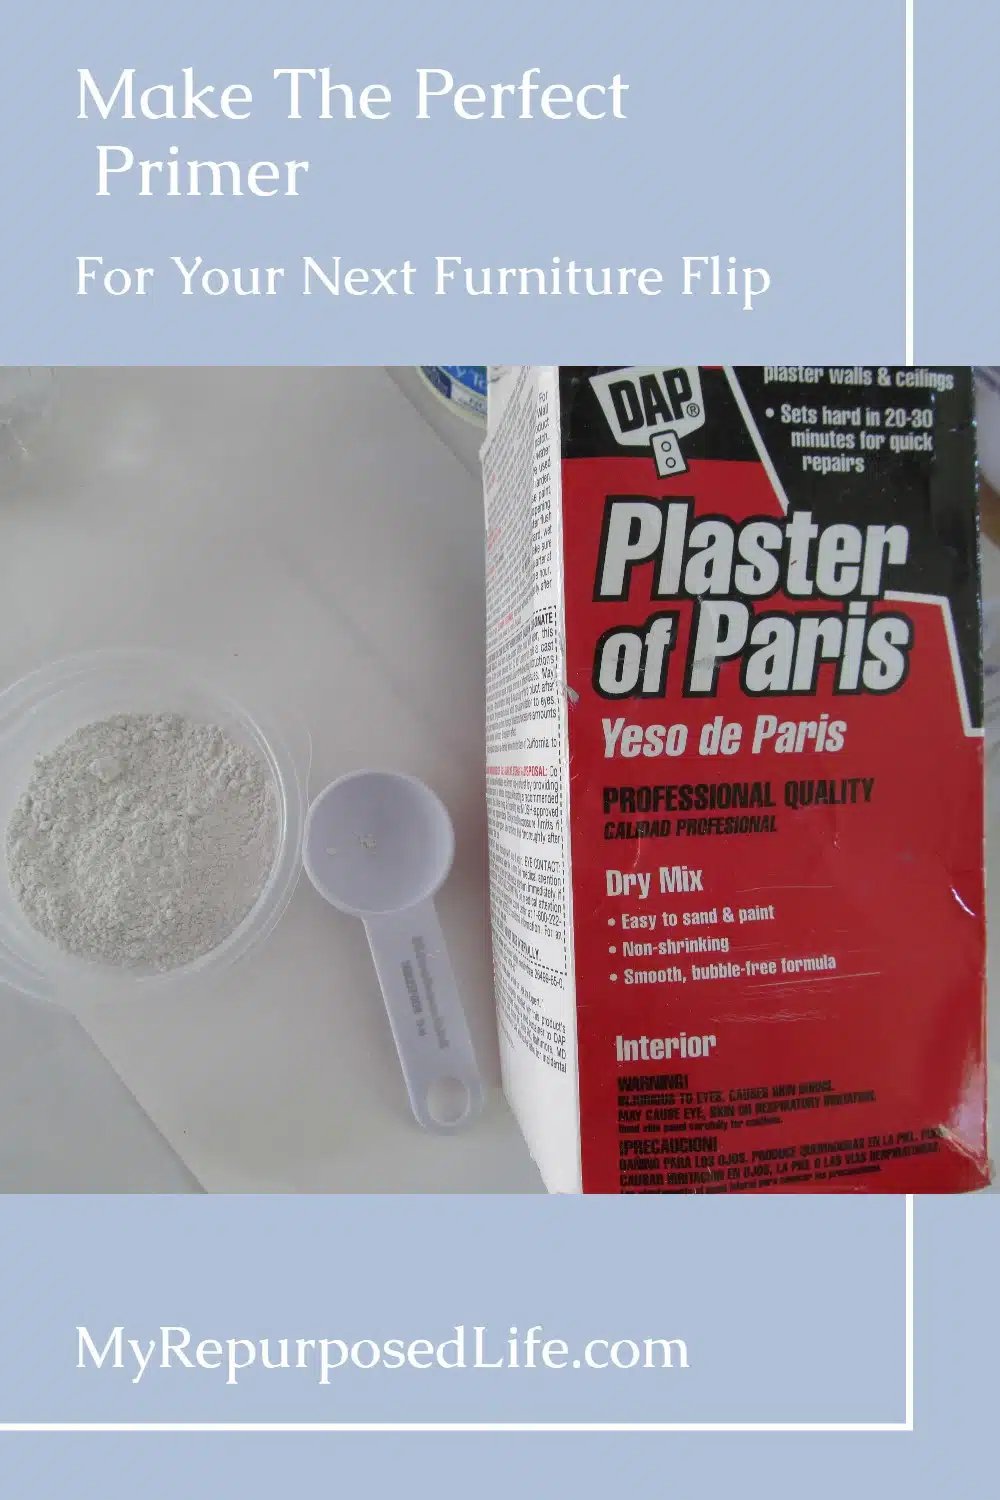 When you mix your own latex wall paint with plaster of paris as a chalk paint, you're missing out on the best part of furniture flipping! Using the homemade mixture as a PRIMER will save you time! Start with the DIY chalk paint, but end with the latex paint without plaster for the easiest and best outcome! #MyRepurposedLife #diy #chalkpaint #homemade #furnitureflipping #easy #painting #furniture via @repurposedlife